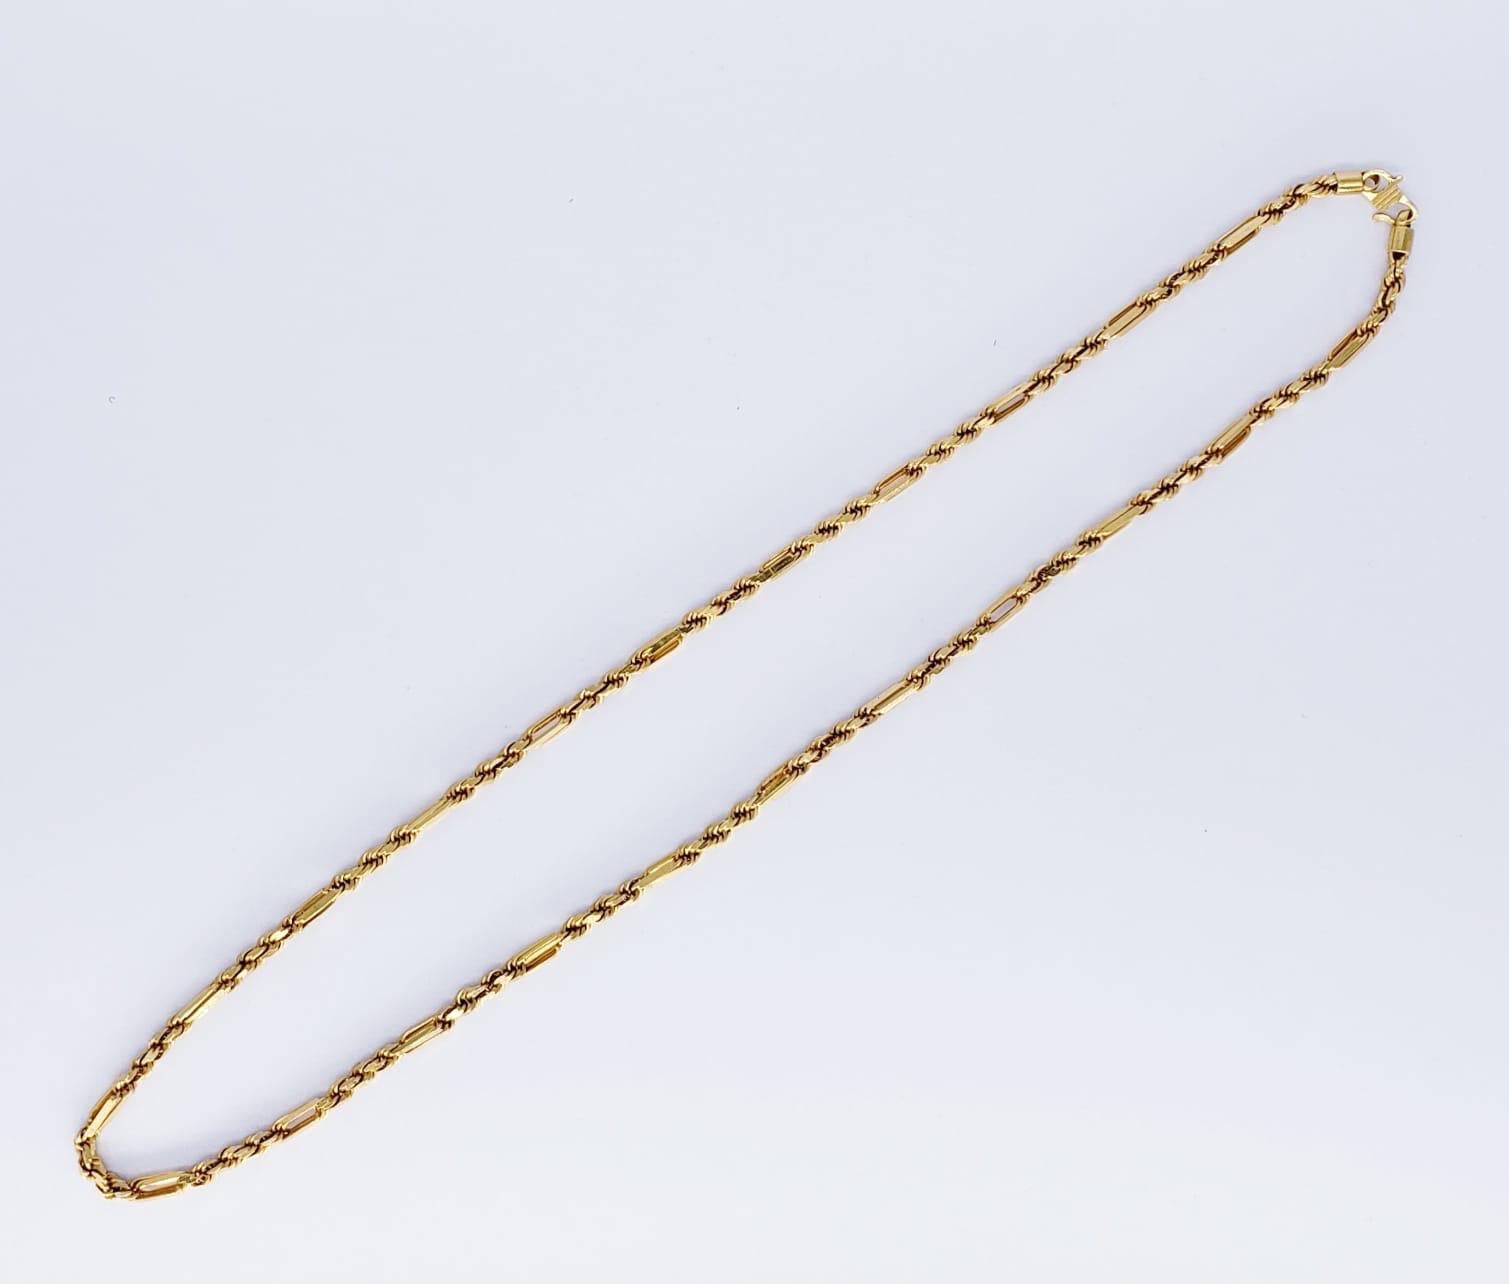 22k solid gold cuban link chain